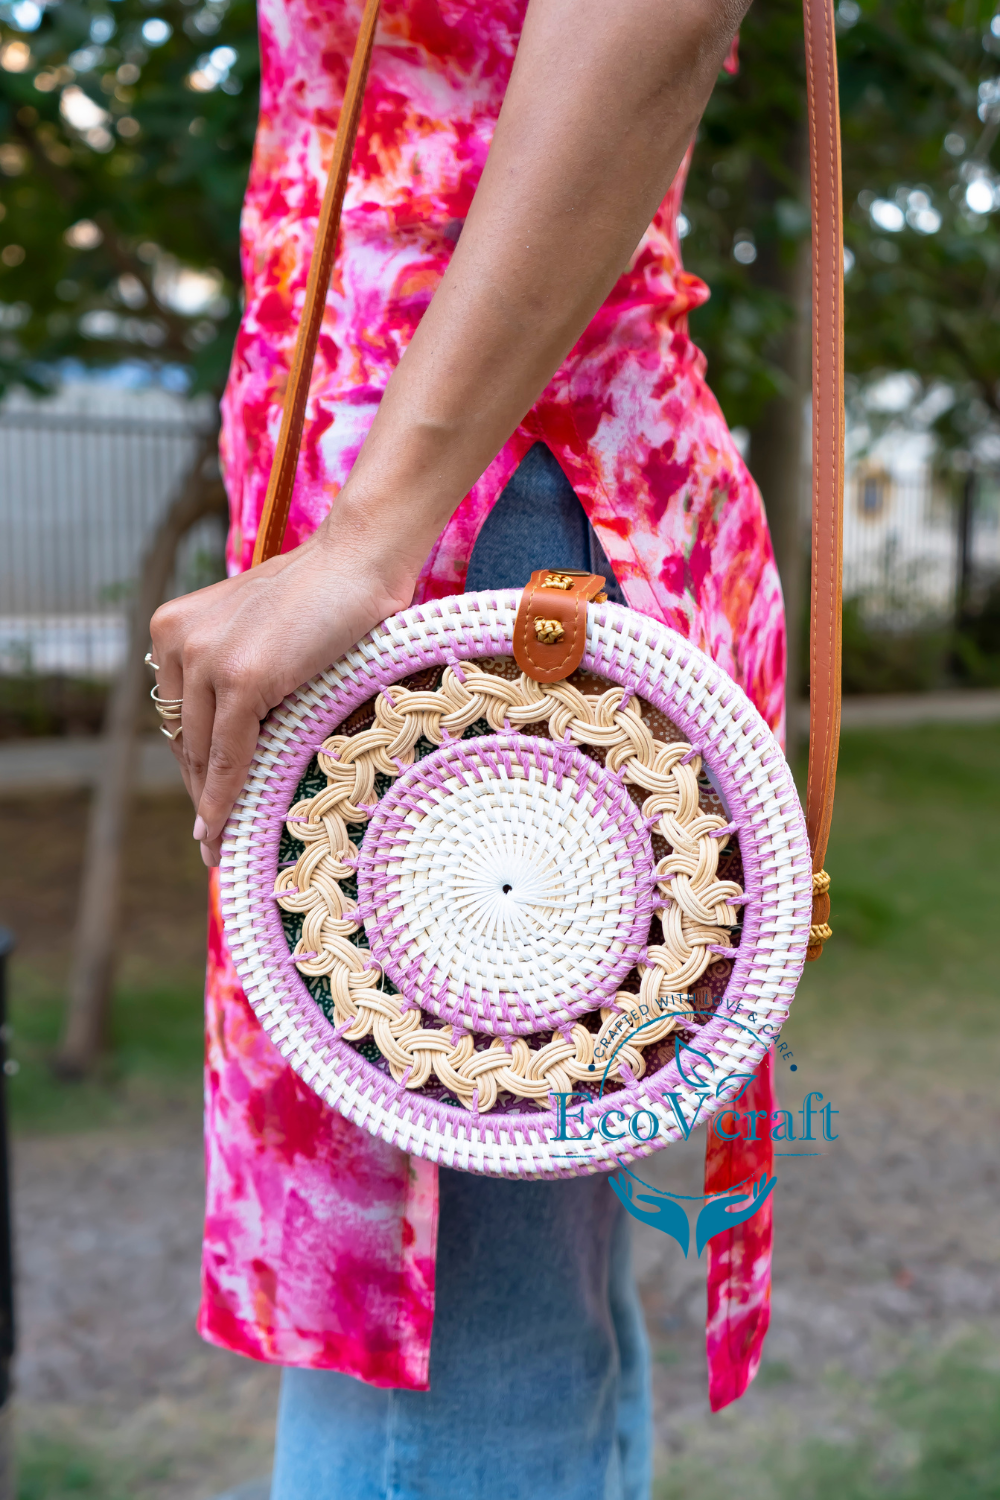 Eco Bliss Pink & White Round Bag